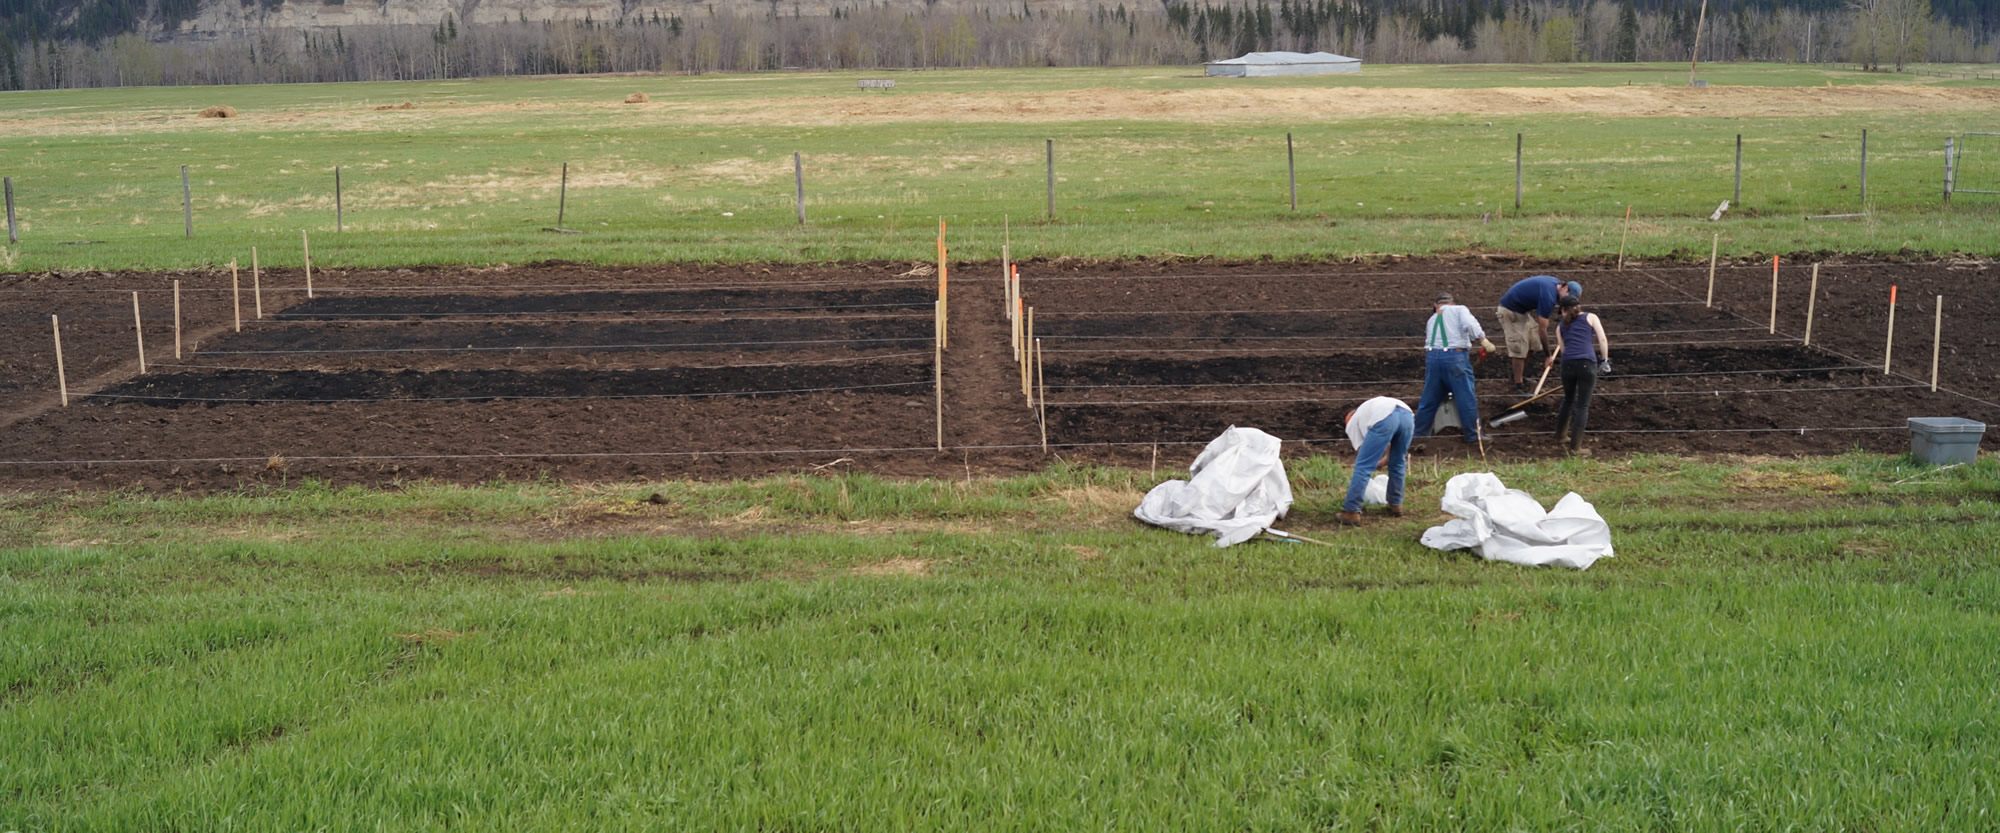 The biochar being applied to the field prior to incorporation and seeding.